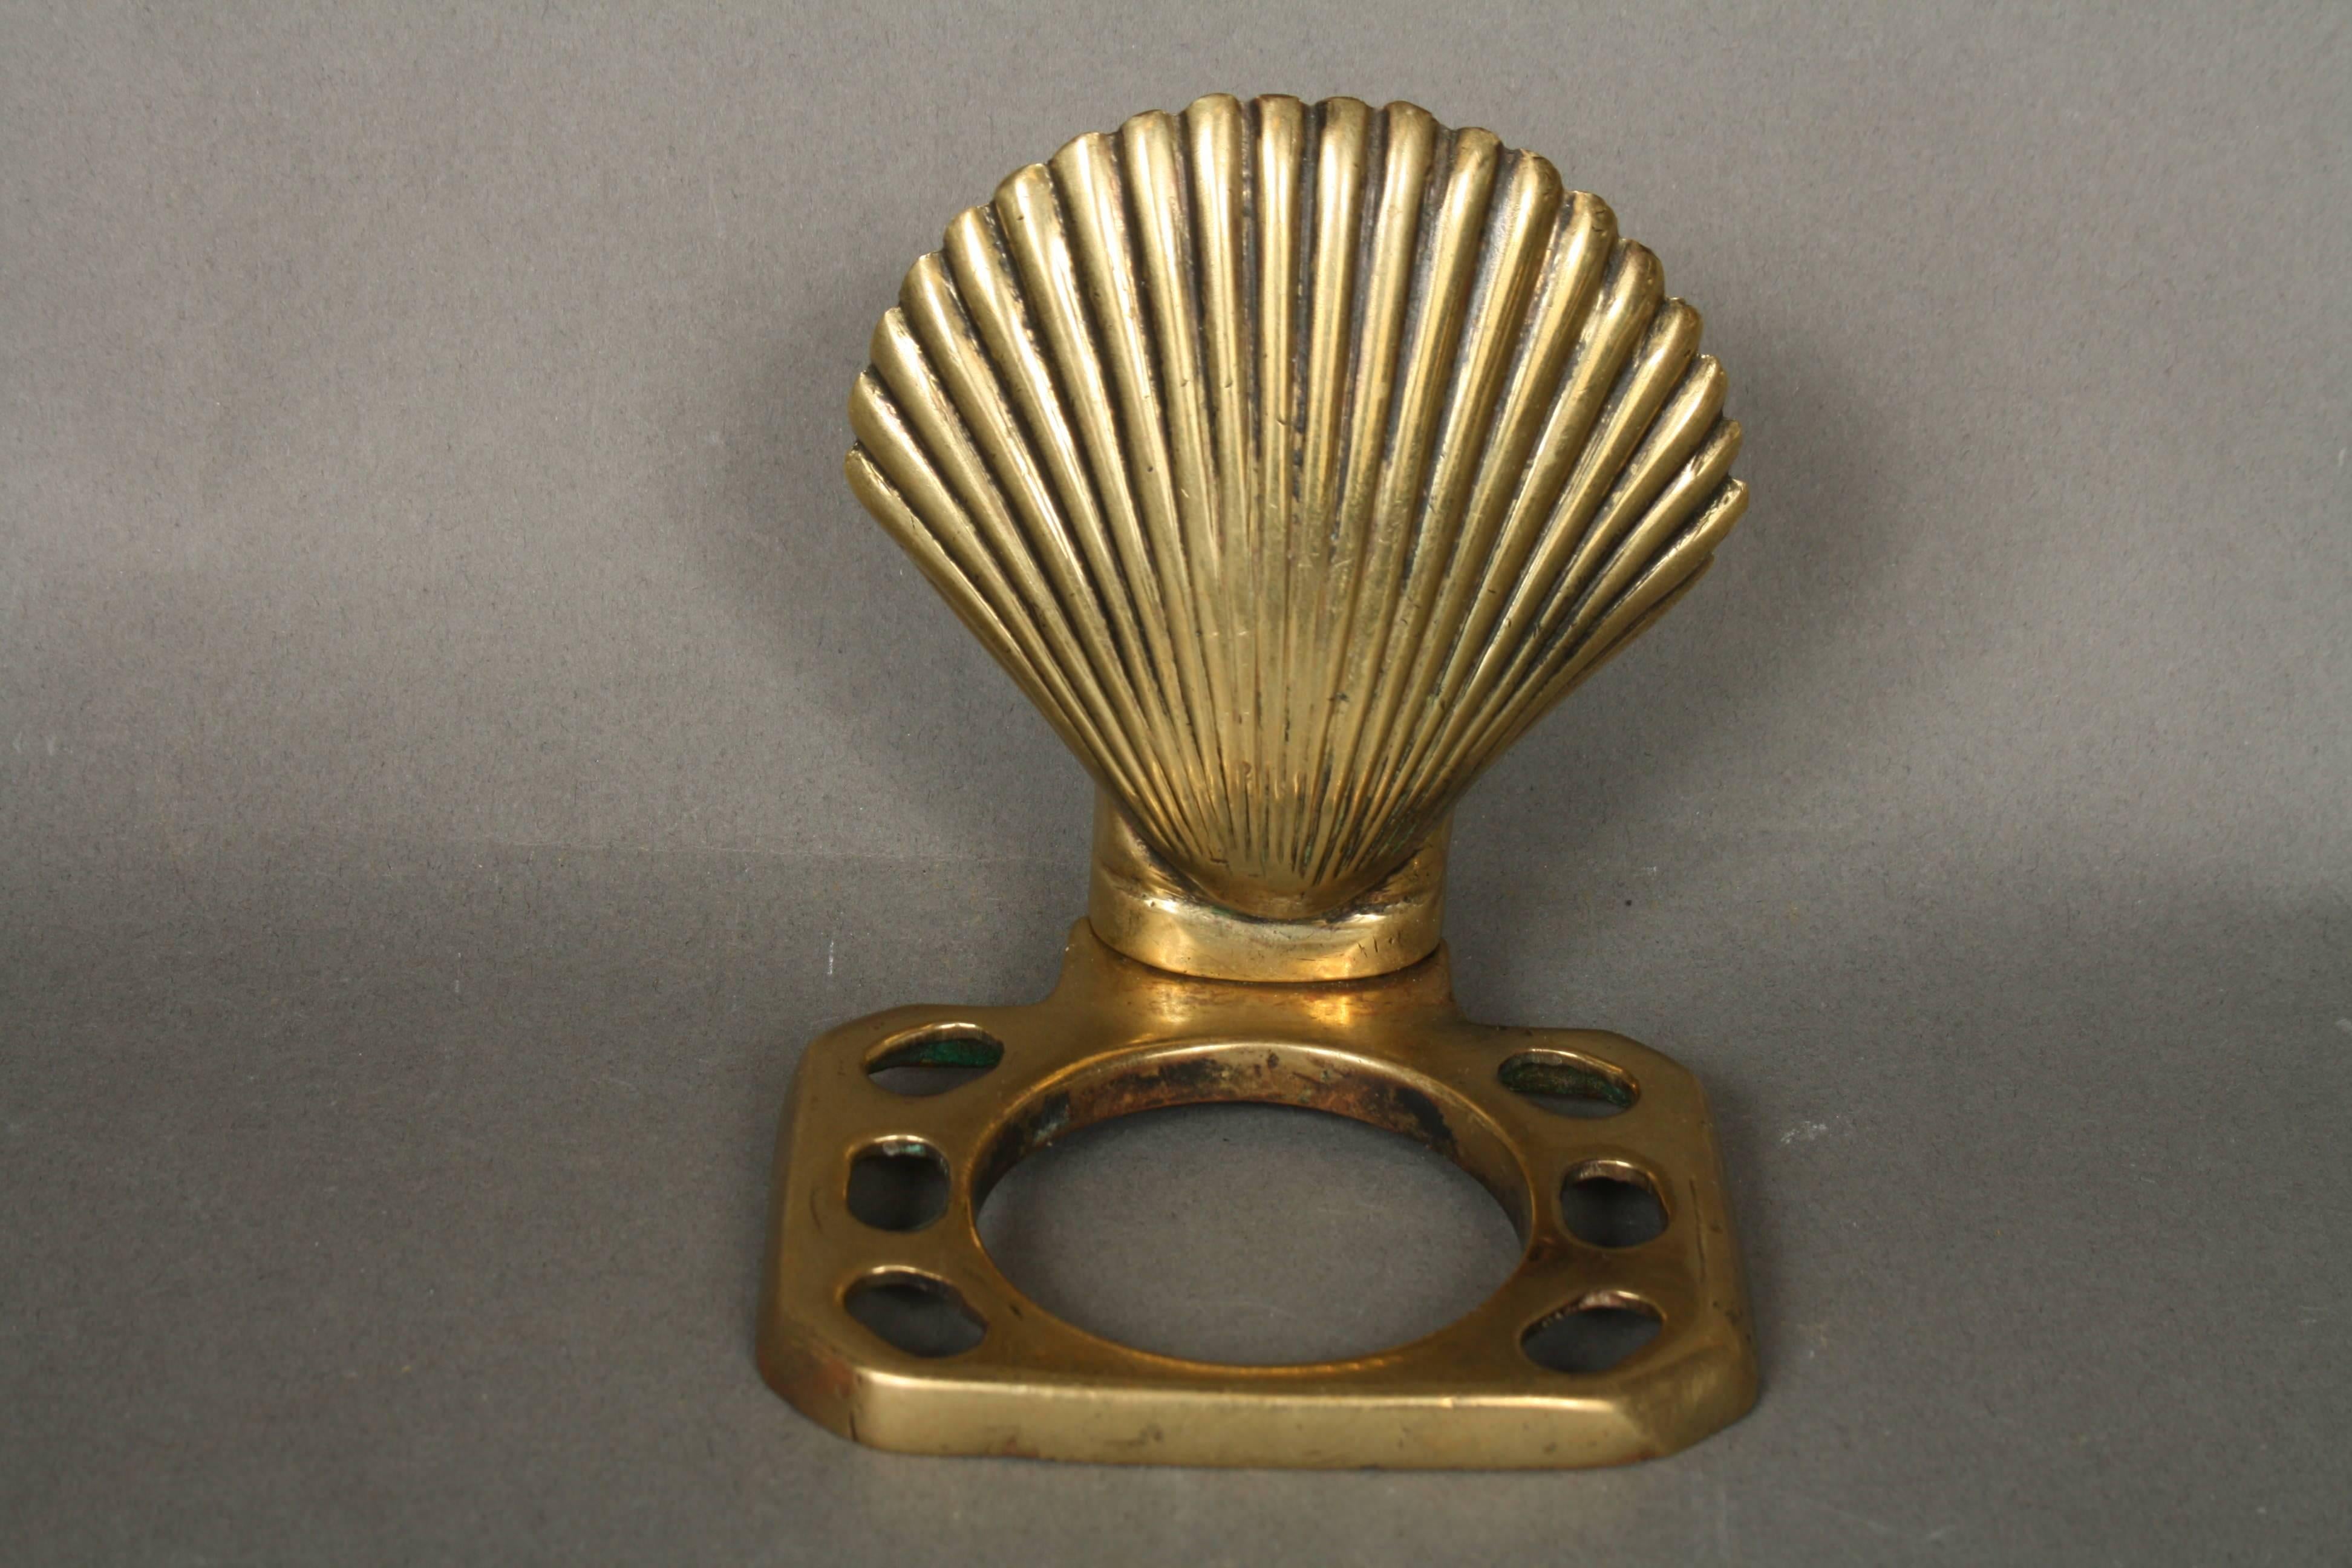 Hollywood Regency Shell Shaped Soap Dish and Toothbrush Holder, Brass, 1950s For Sale